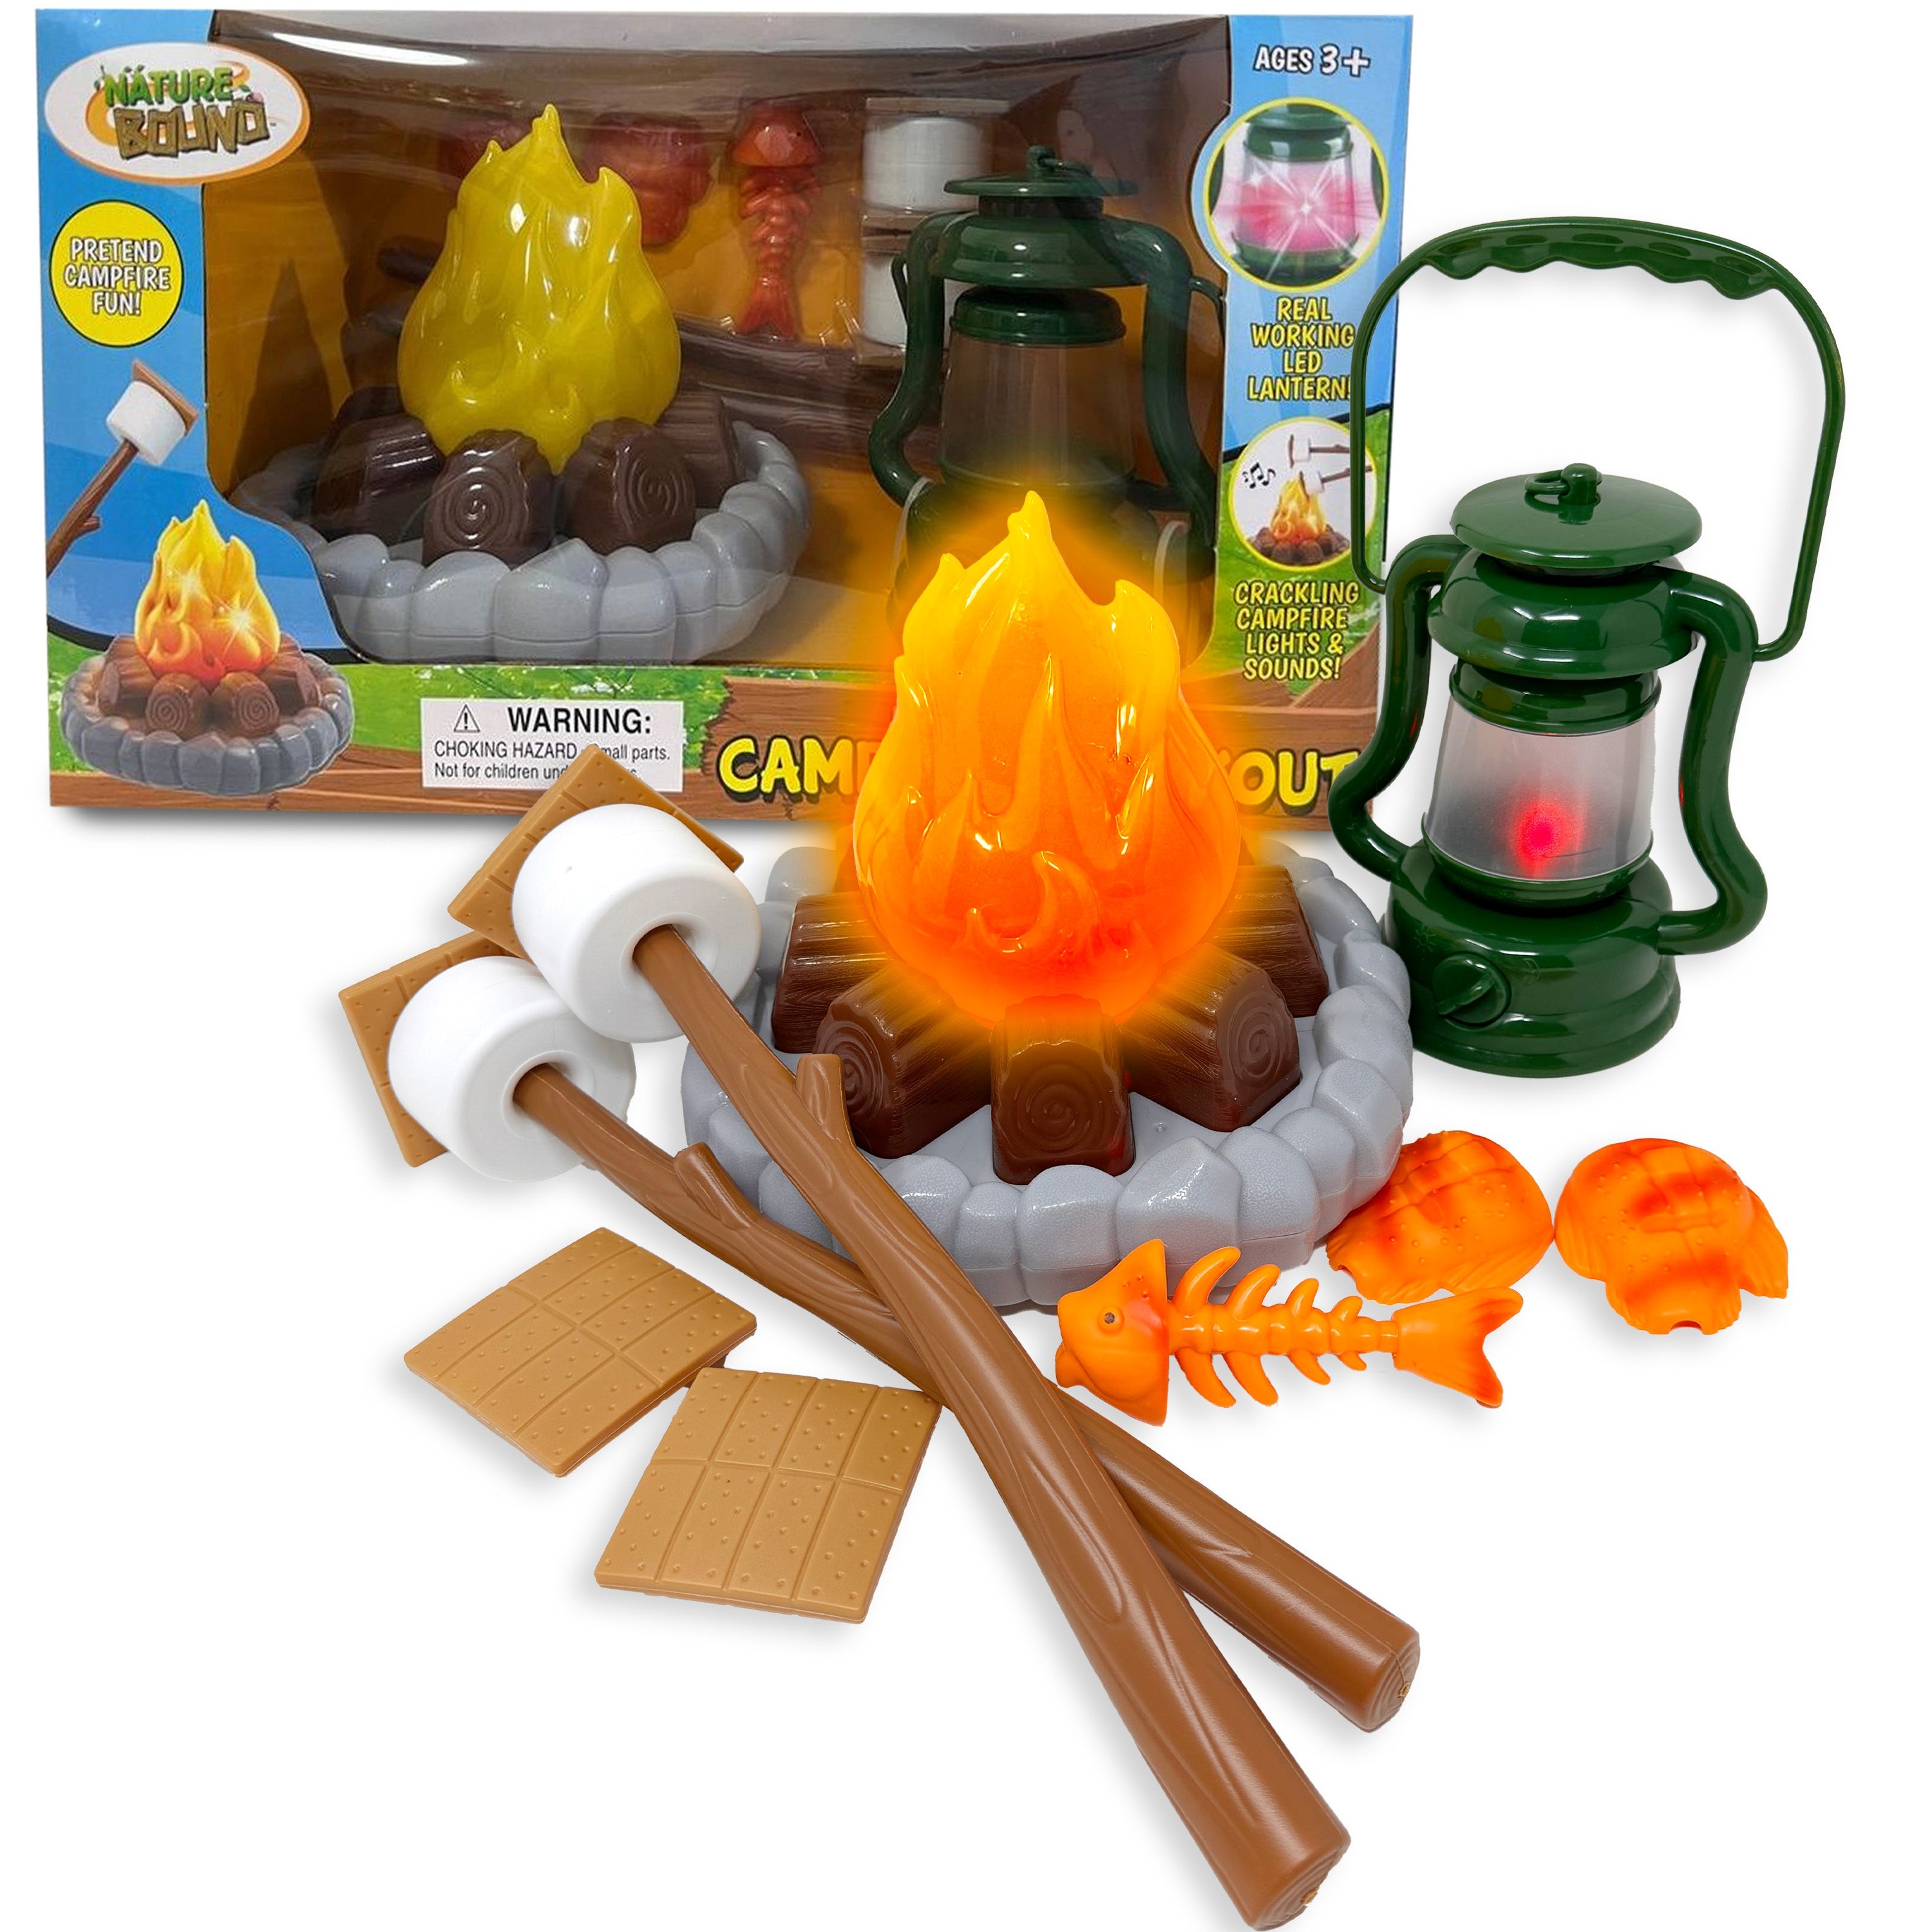 Campfire Cookout Playset Ages 3+ Years